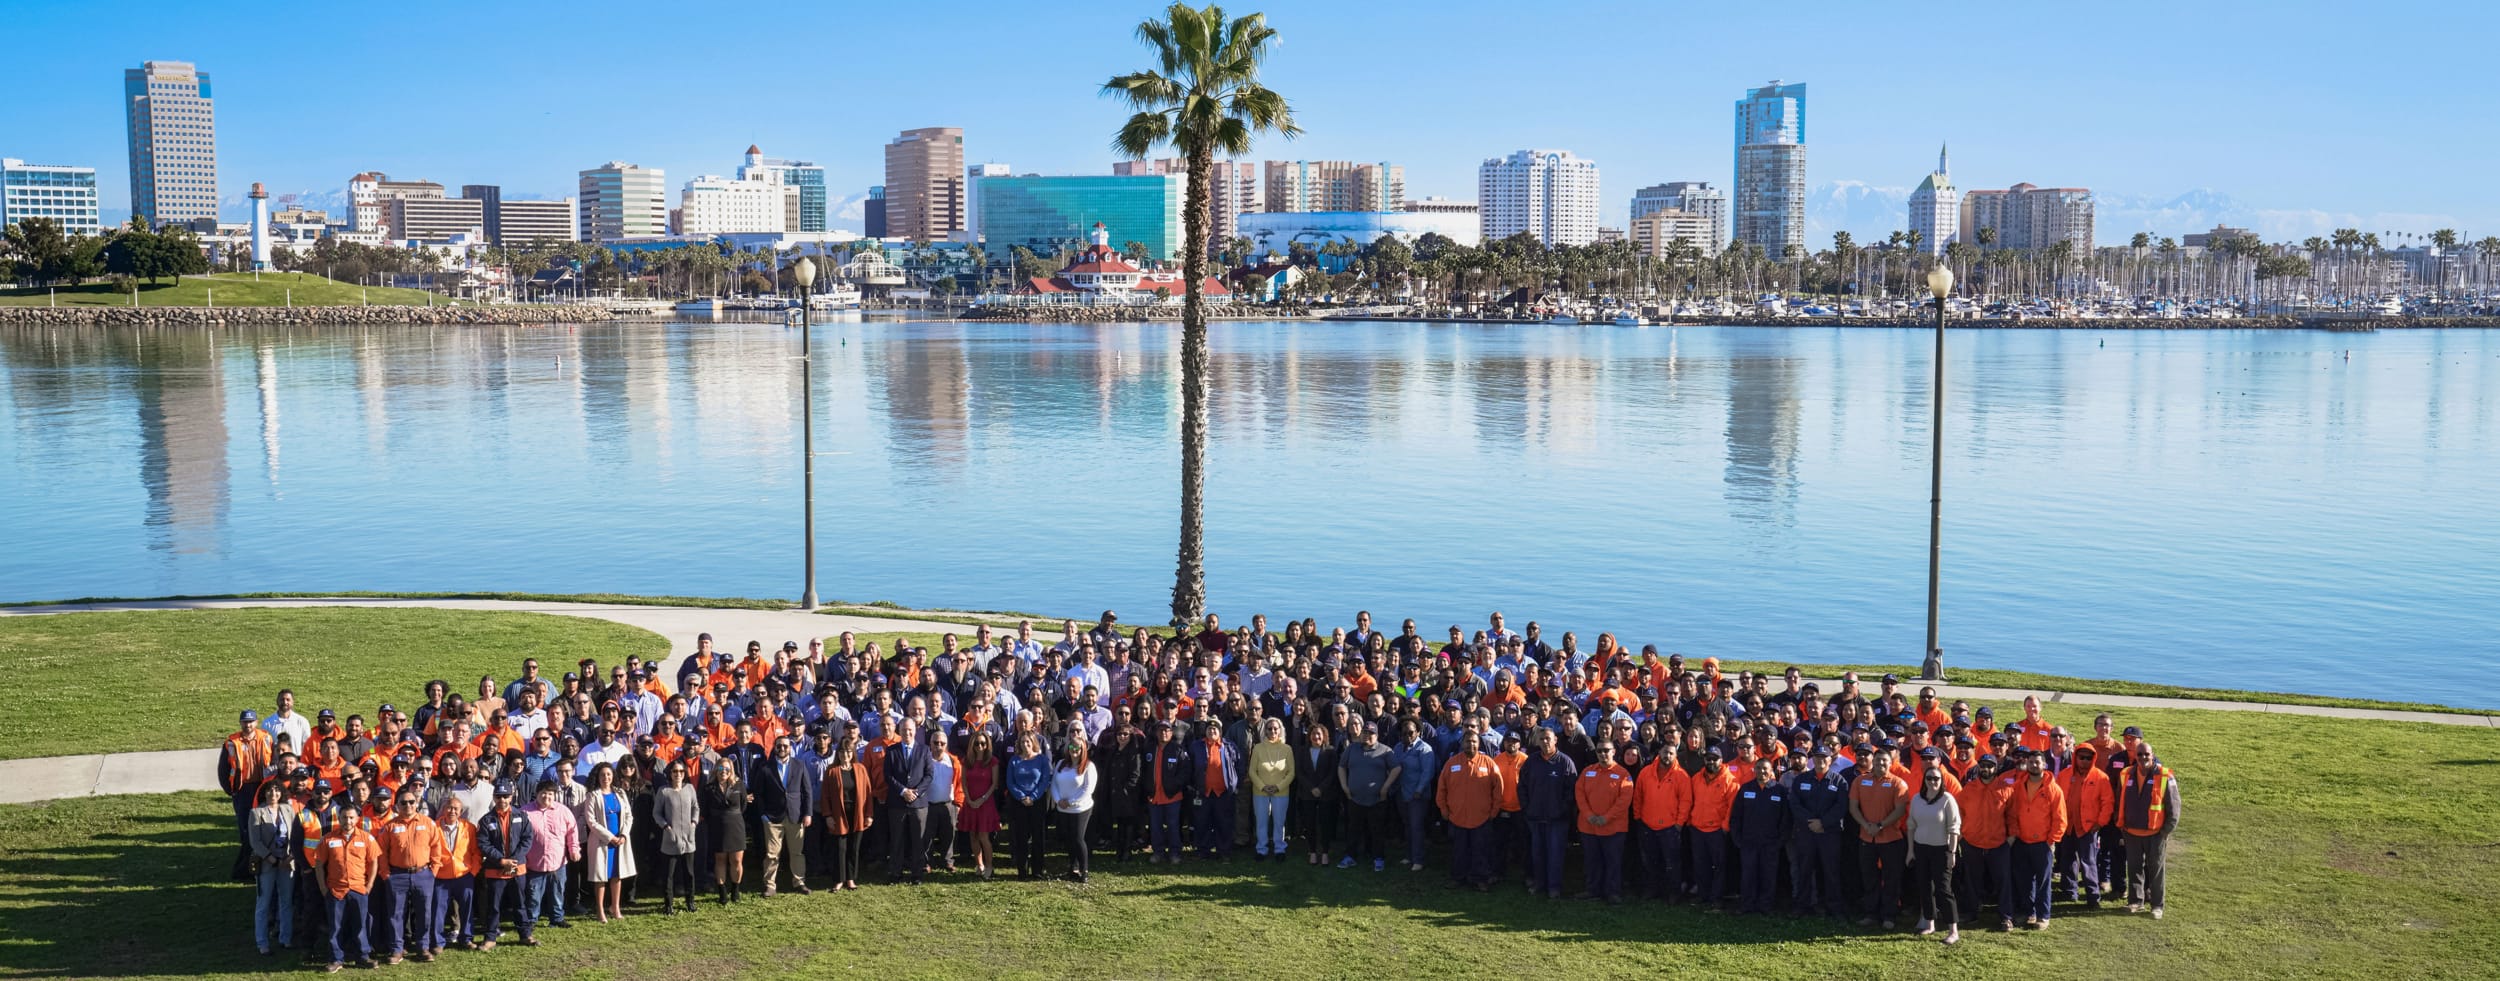 Long Beach Utilities employees gathered at lake with city in the background